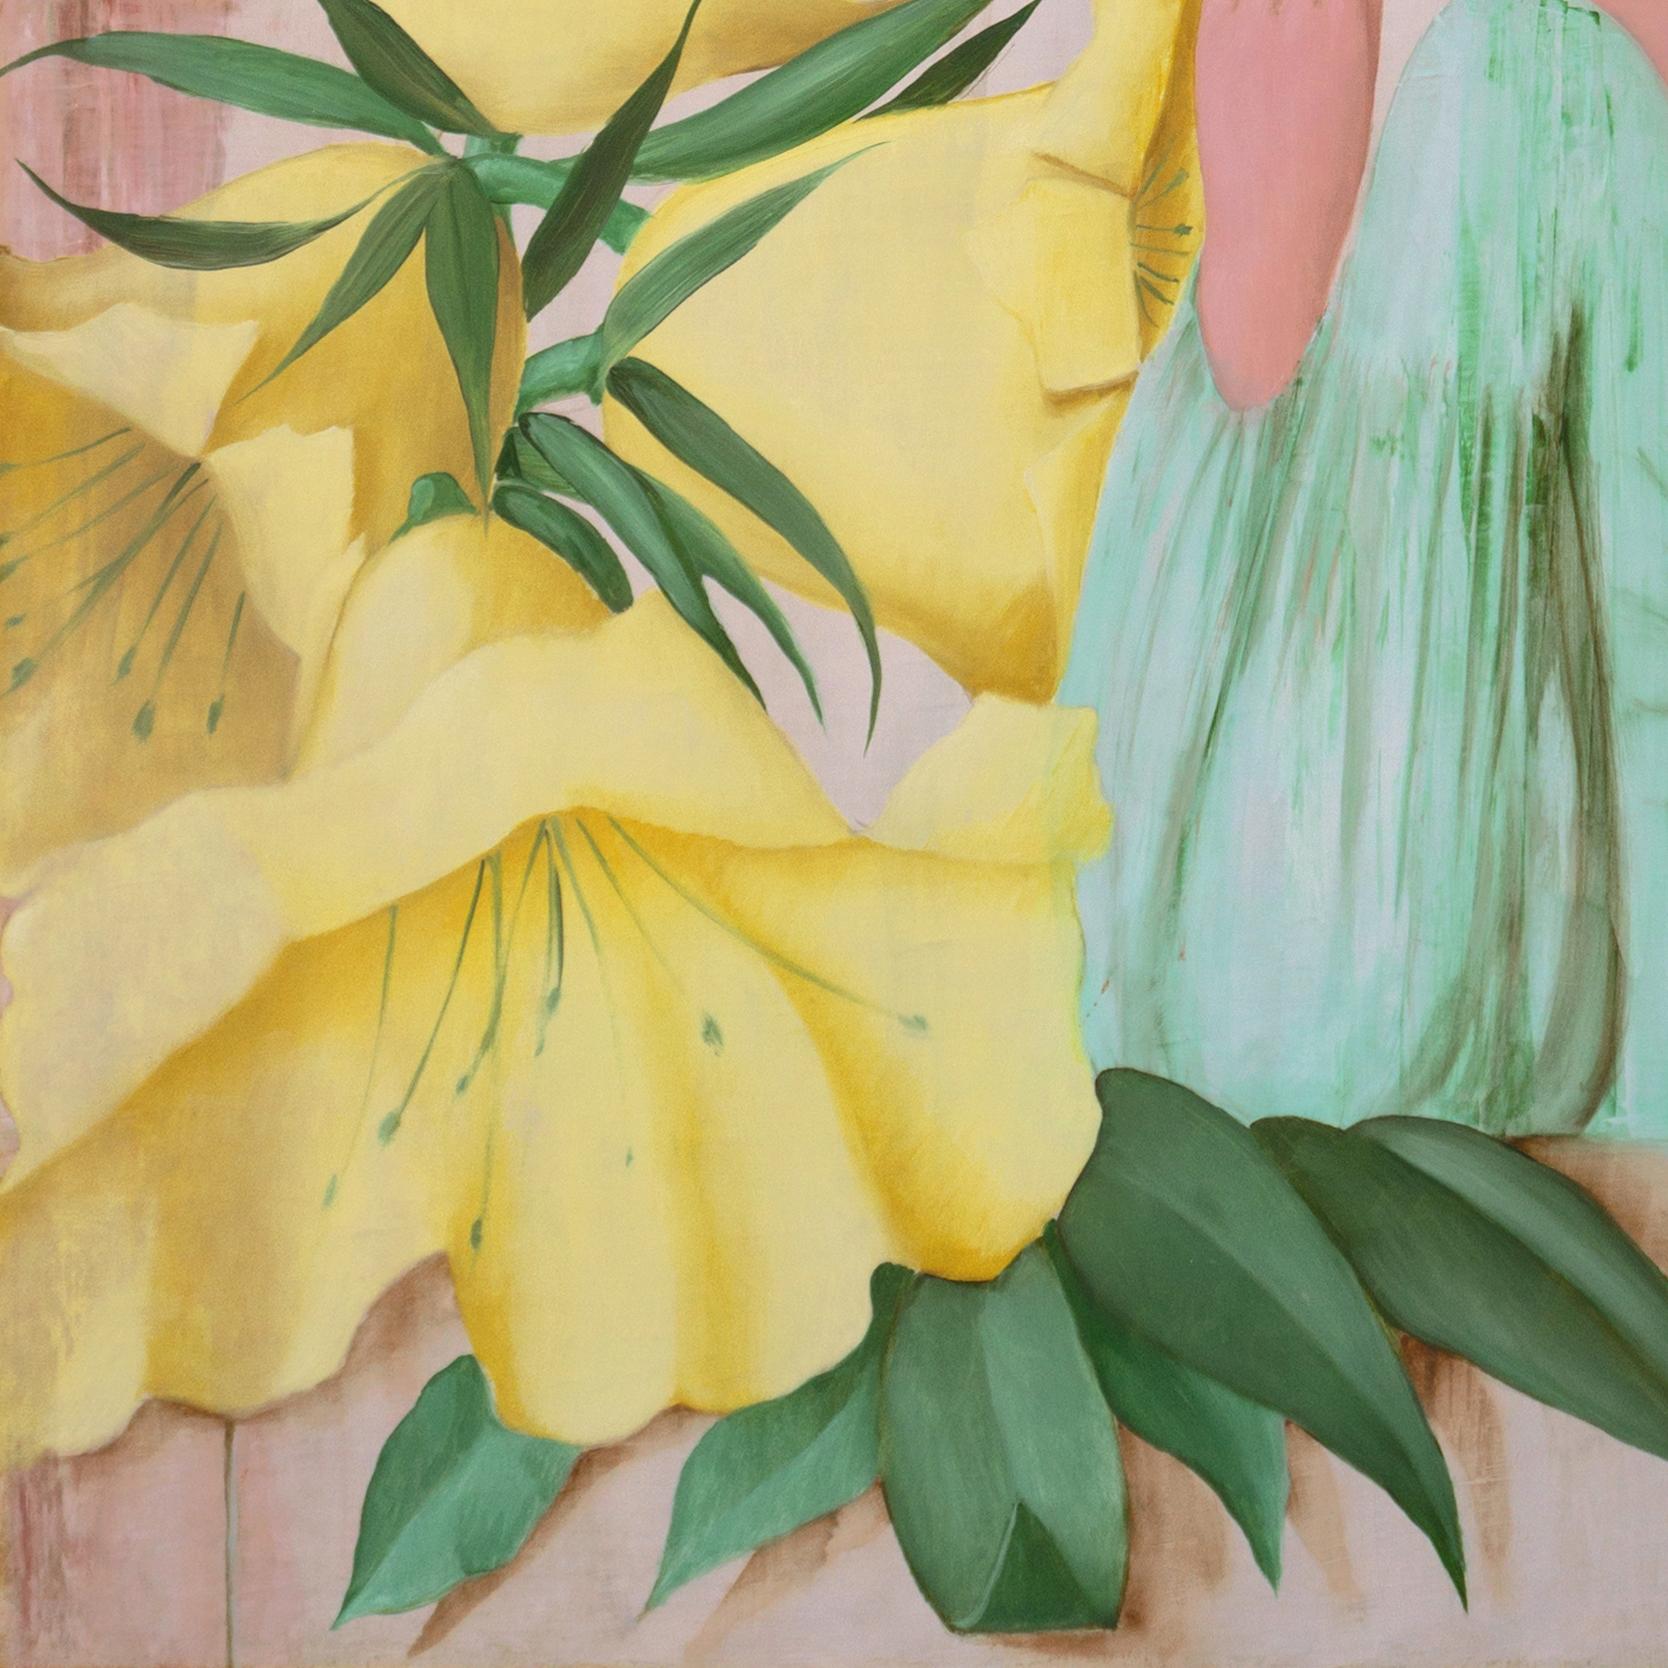 'Woman in Green', Modernist Fashion Portrait in Green and Yellow, Paris - Beige Figurative Painting by Philippe Auge